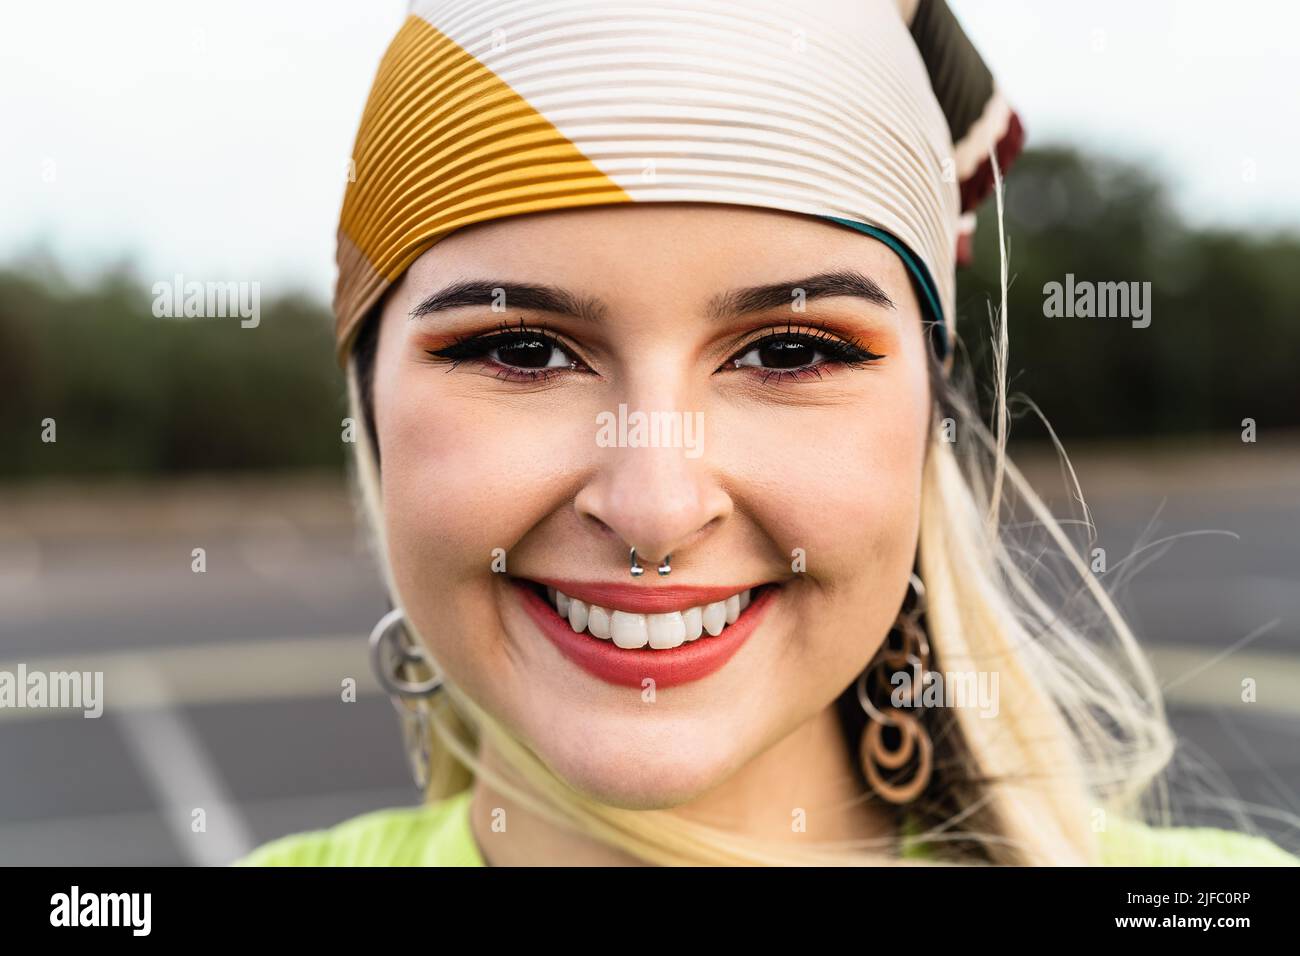 Portrait happy young girl while having fun hanging out Stock Photo